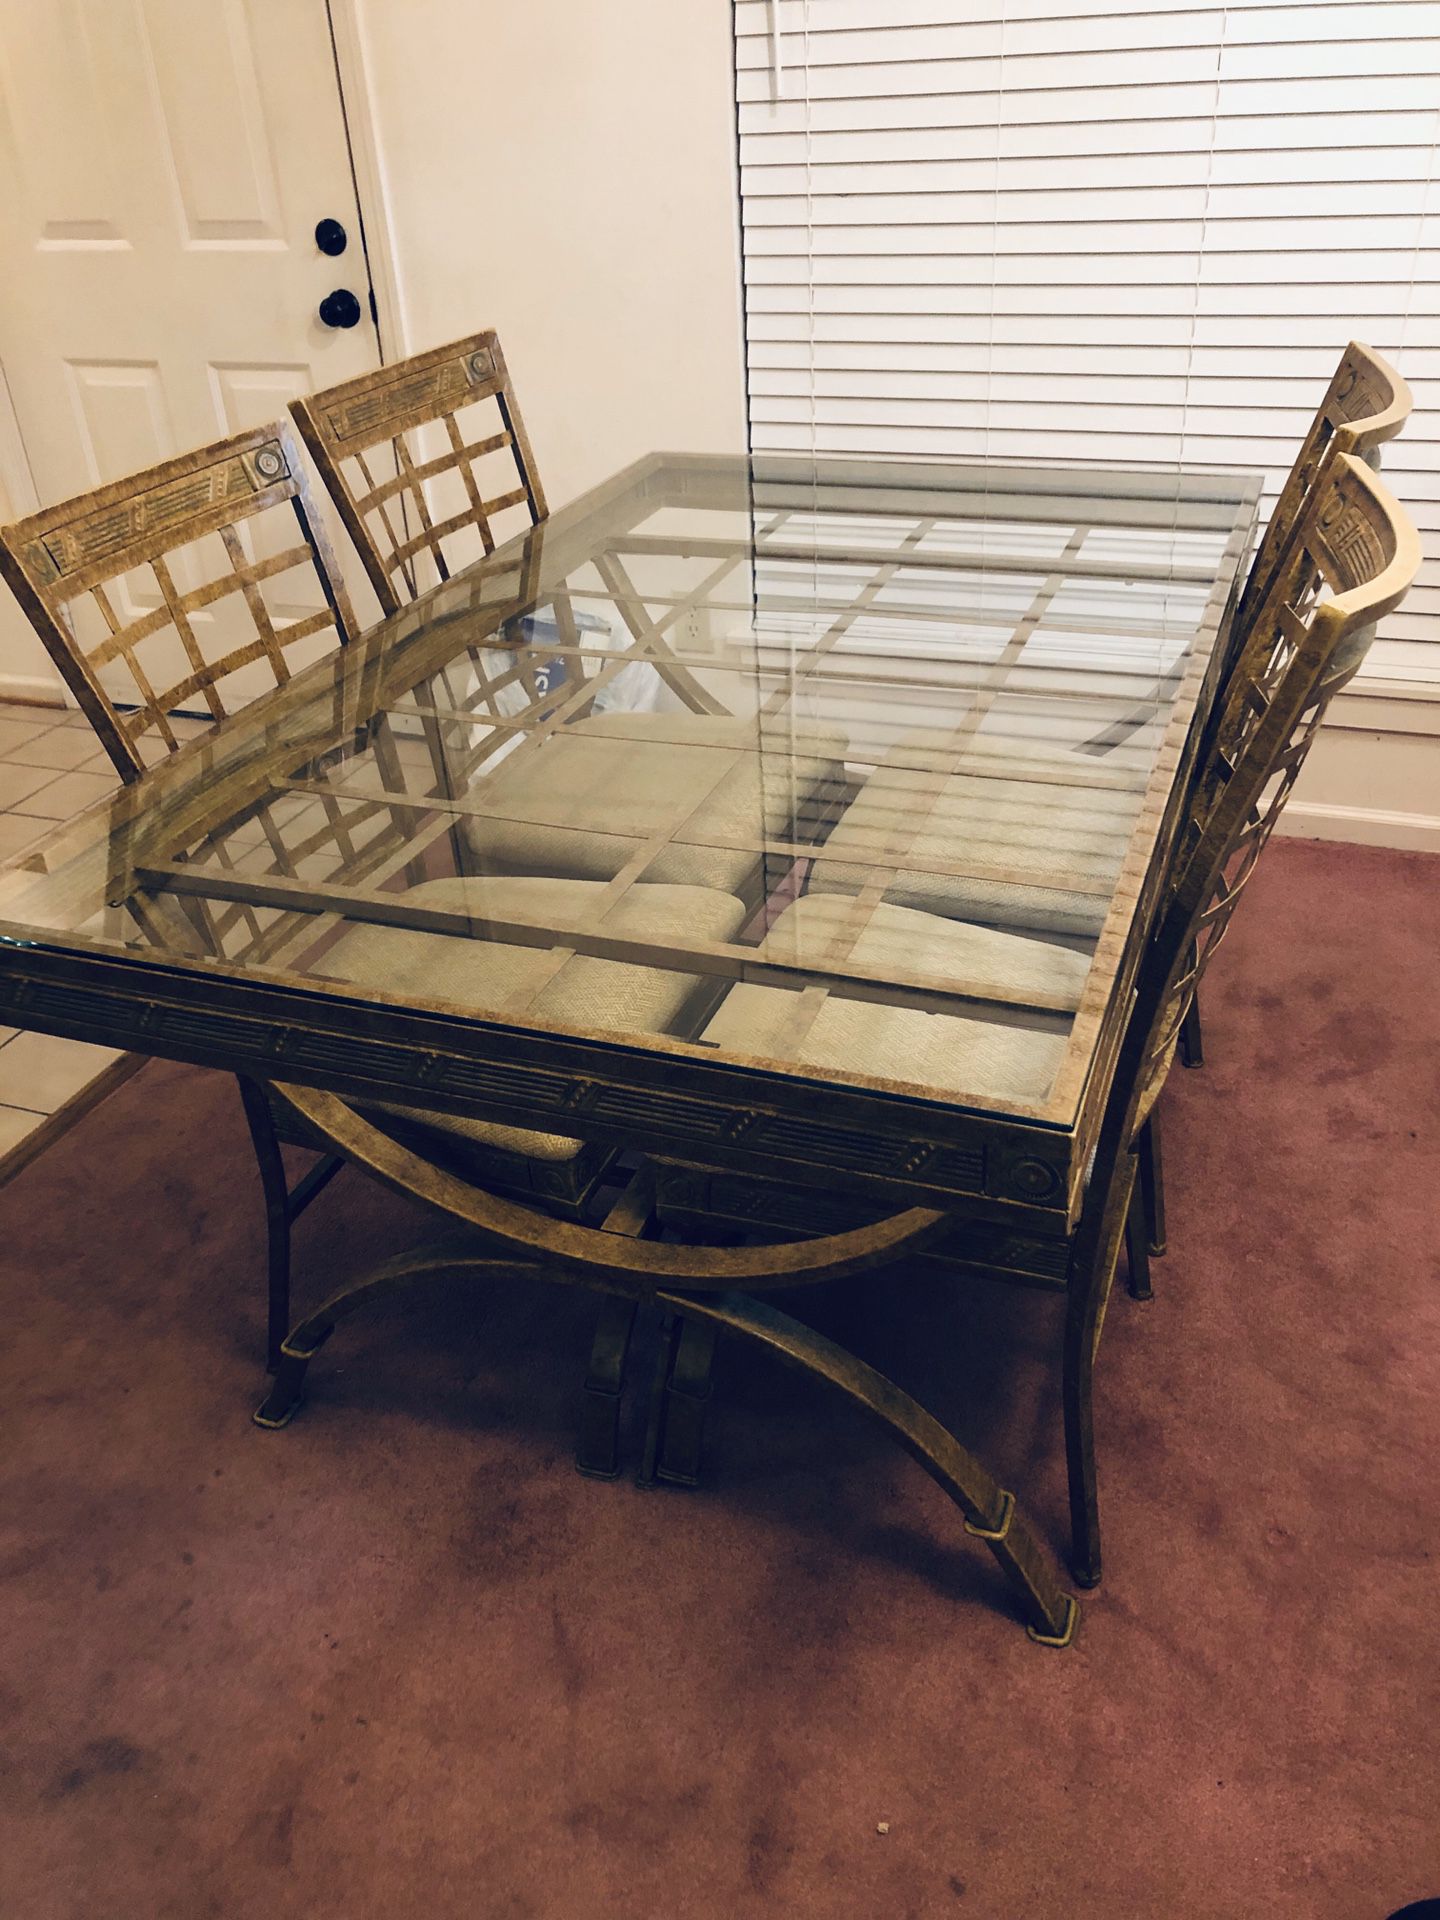 Glass dining room table and chairs set - 4 chairs